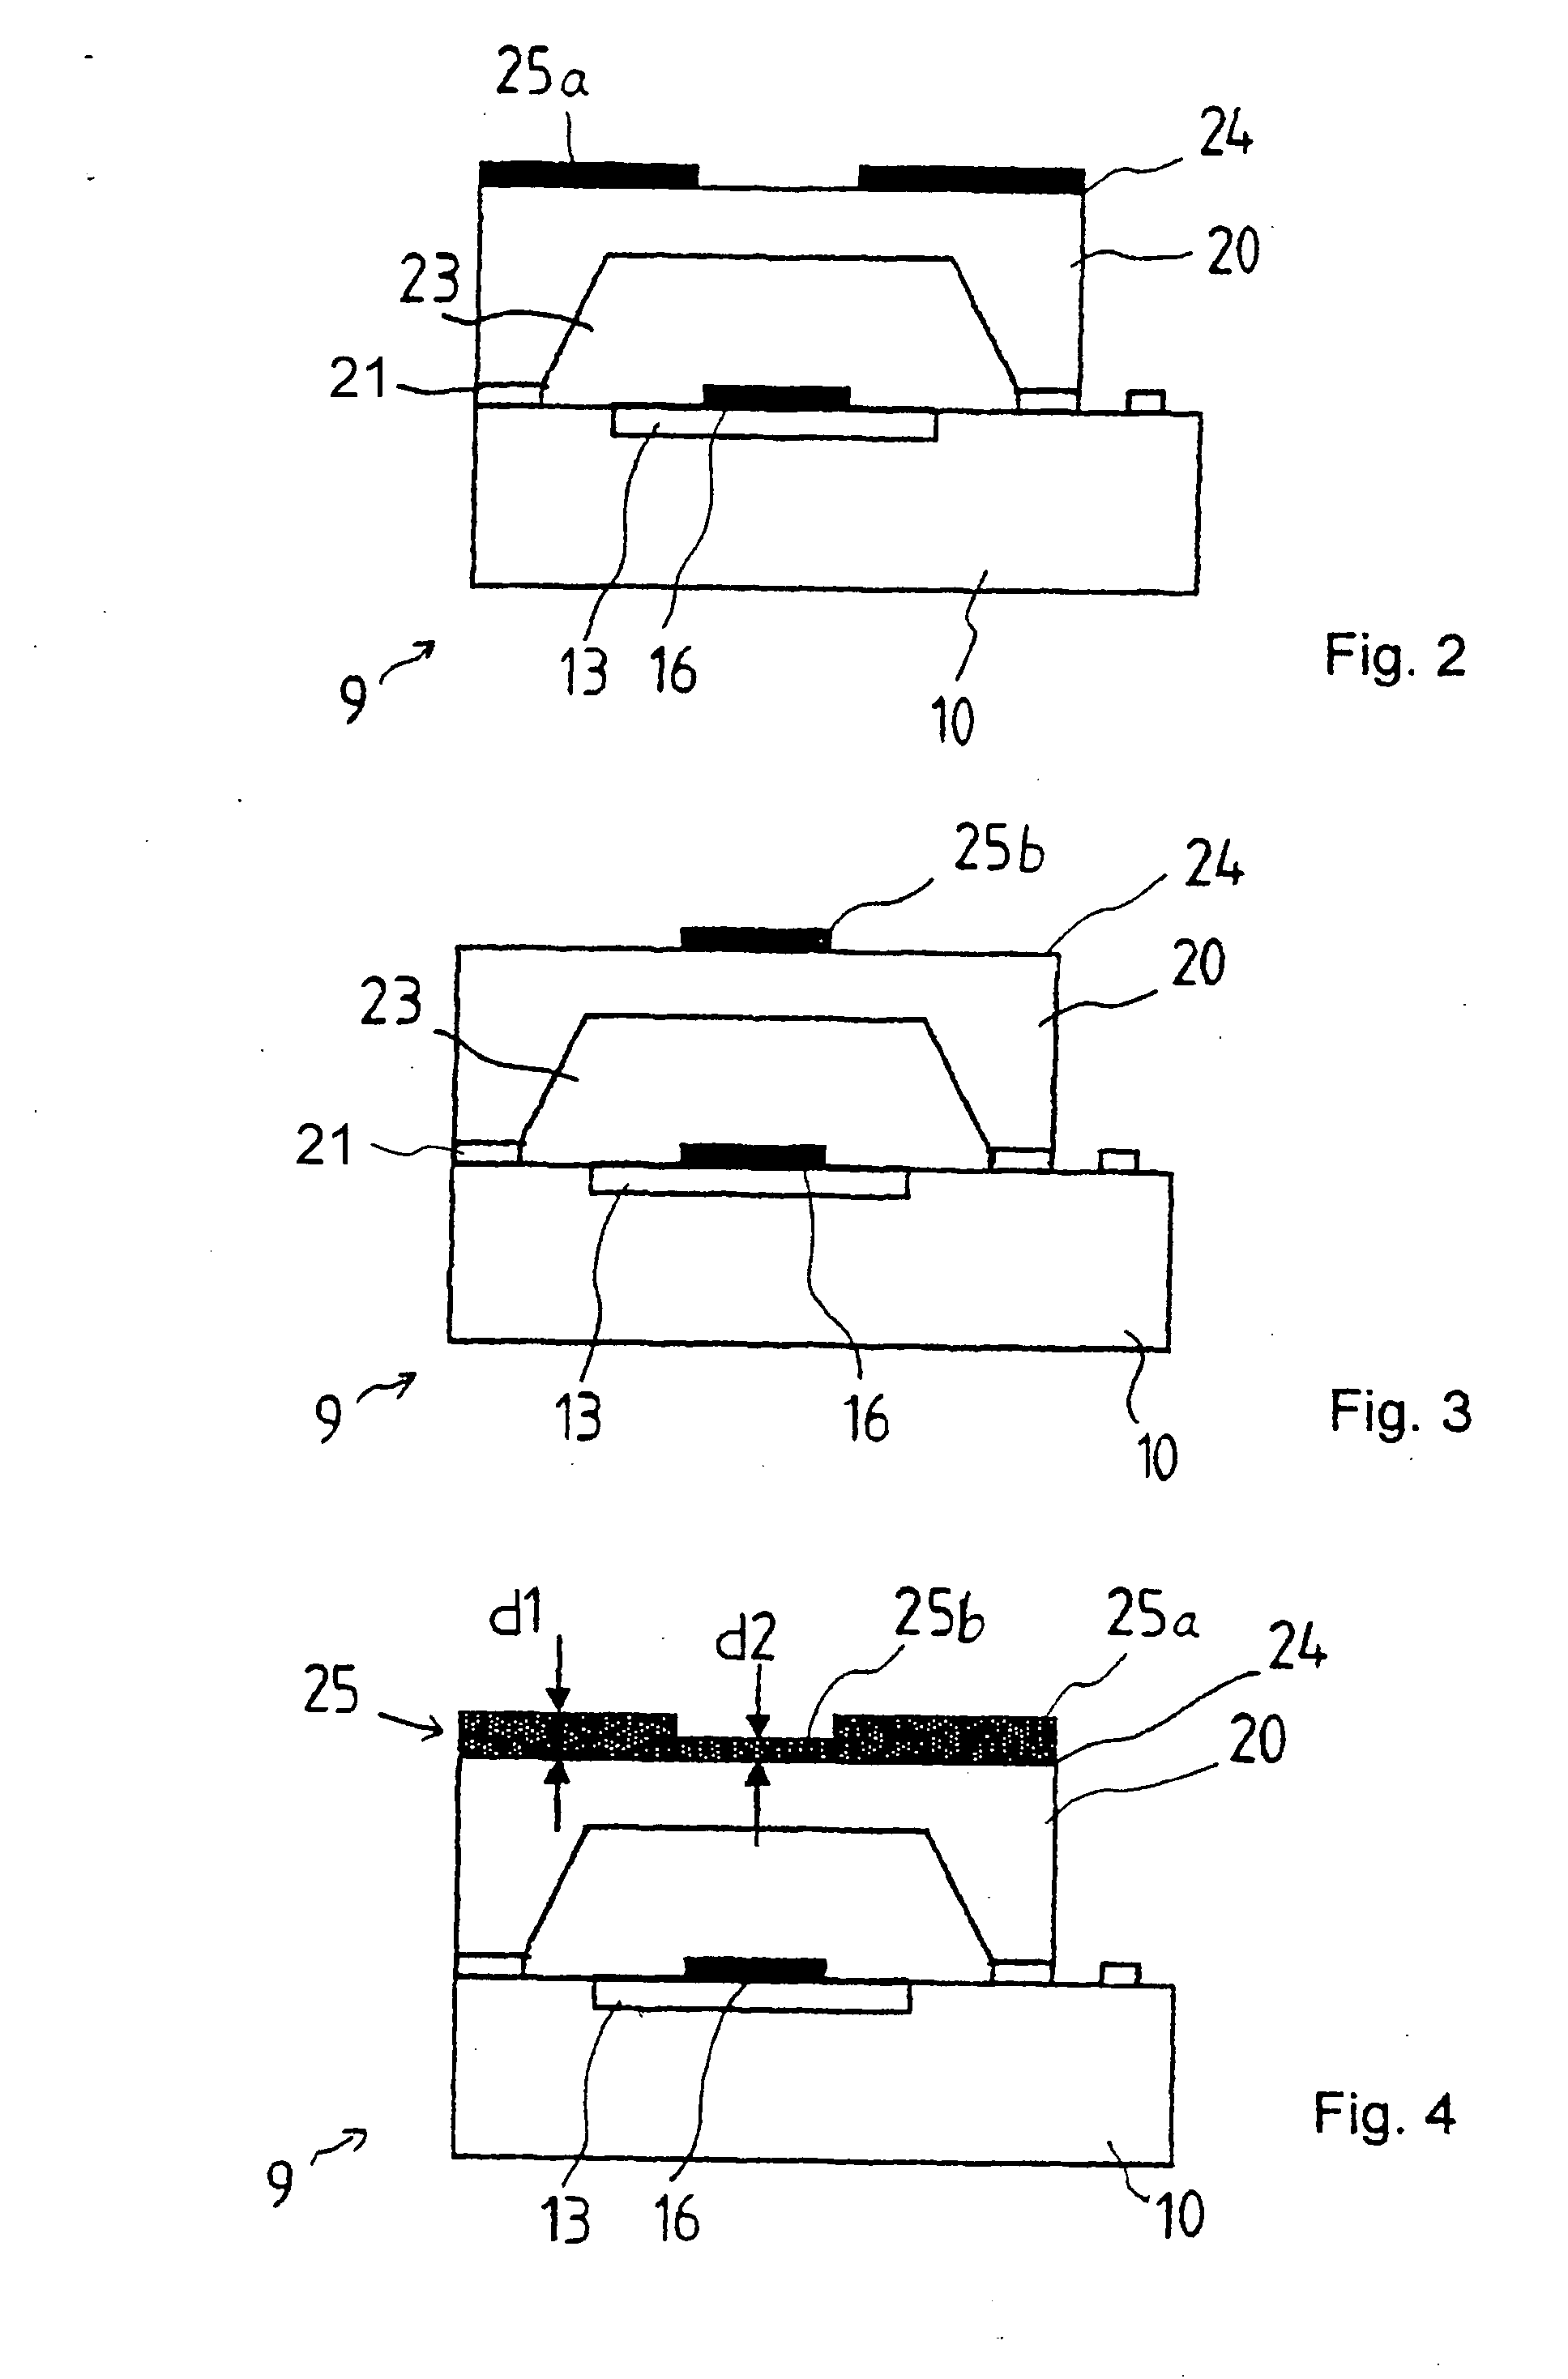 Microstructured Infrared Sensor